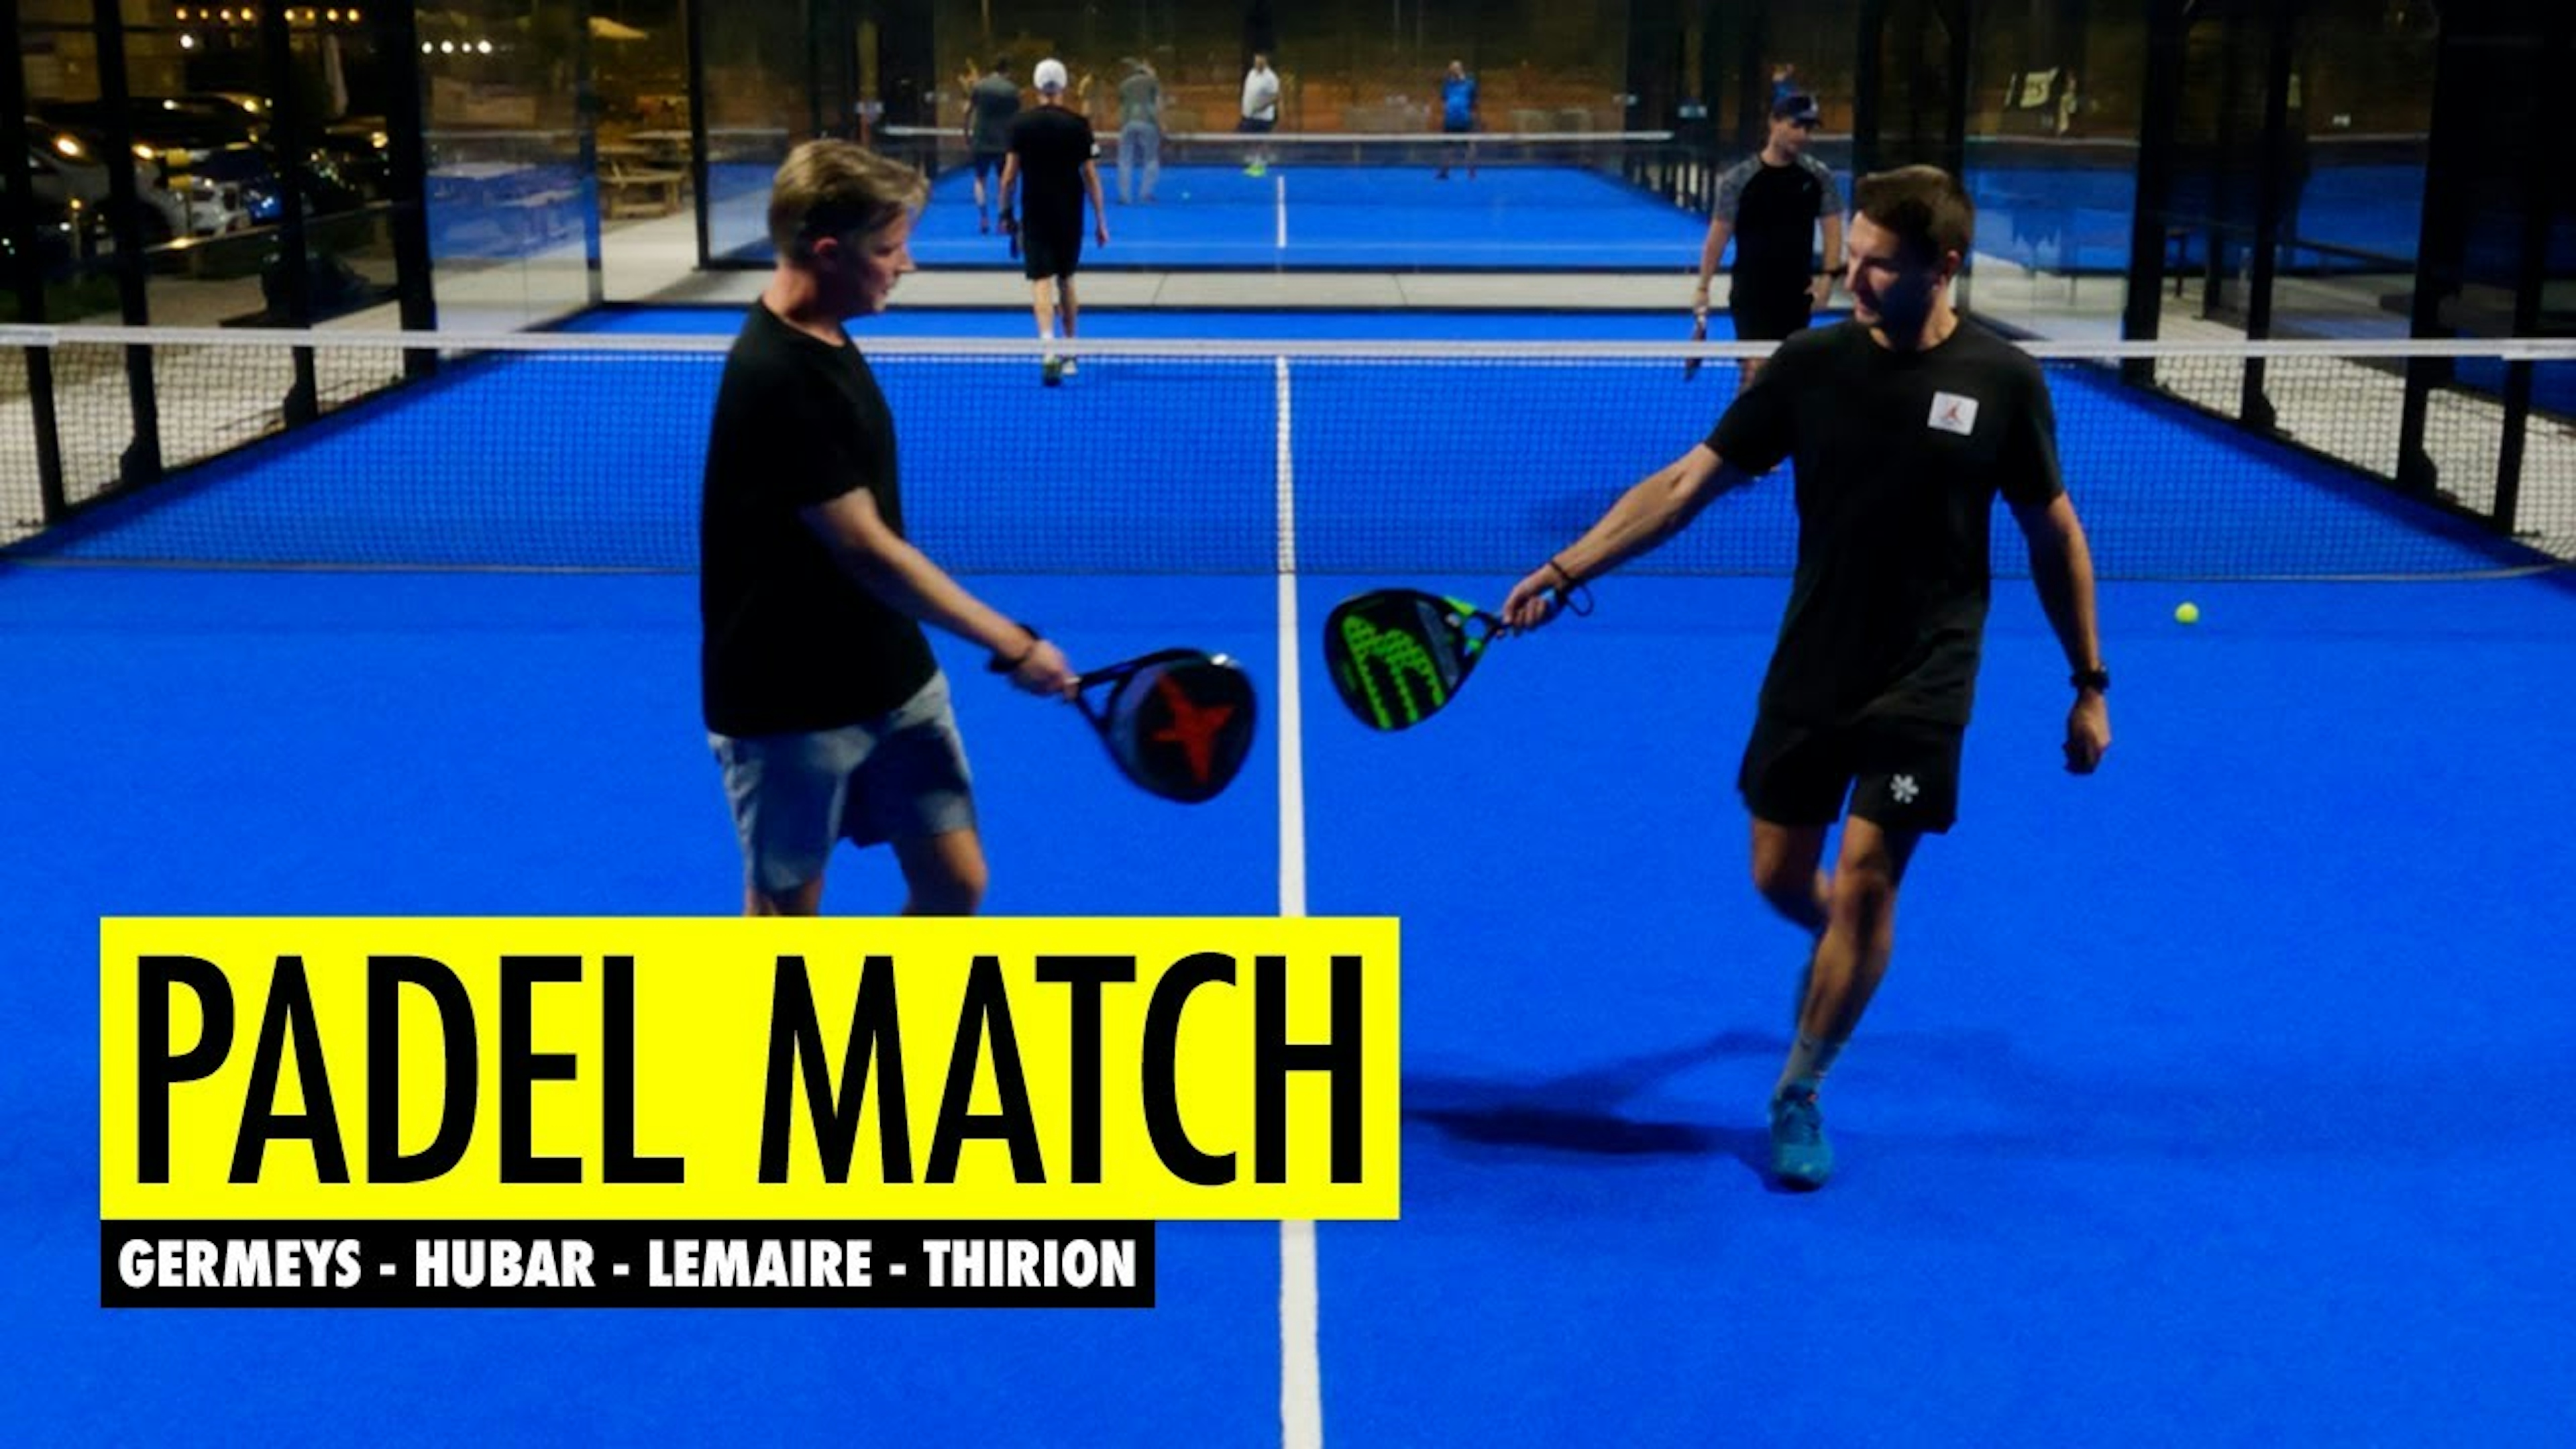 Padel Match: Germeys - Hubar - Lemaire - Thirion | Andy Lemaire